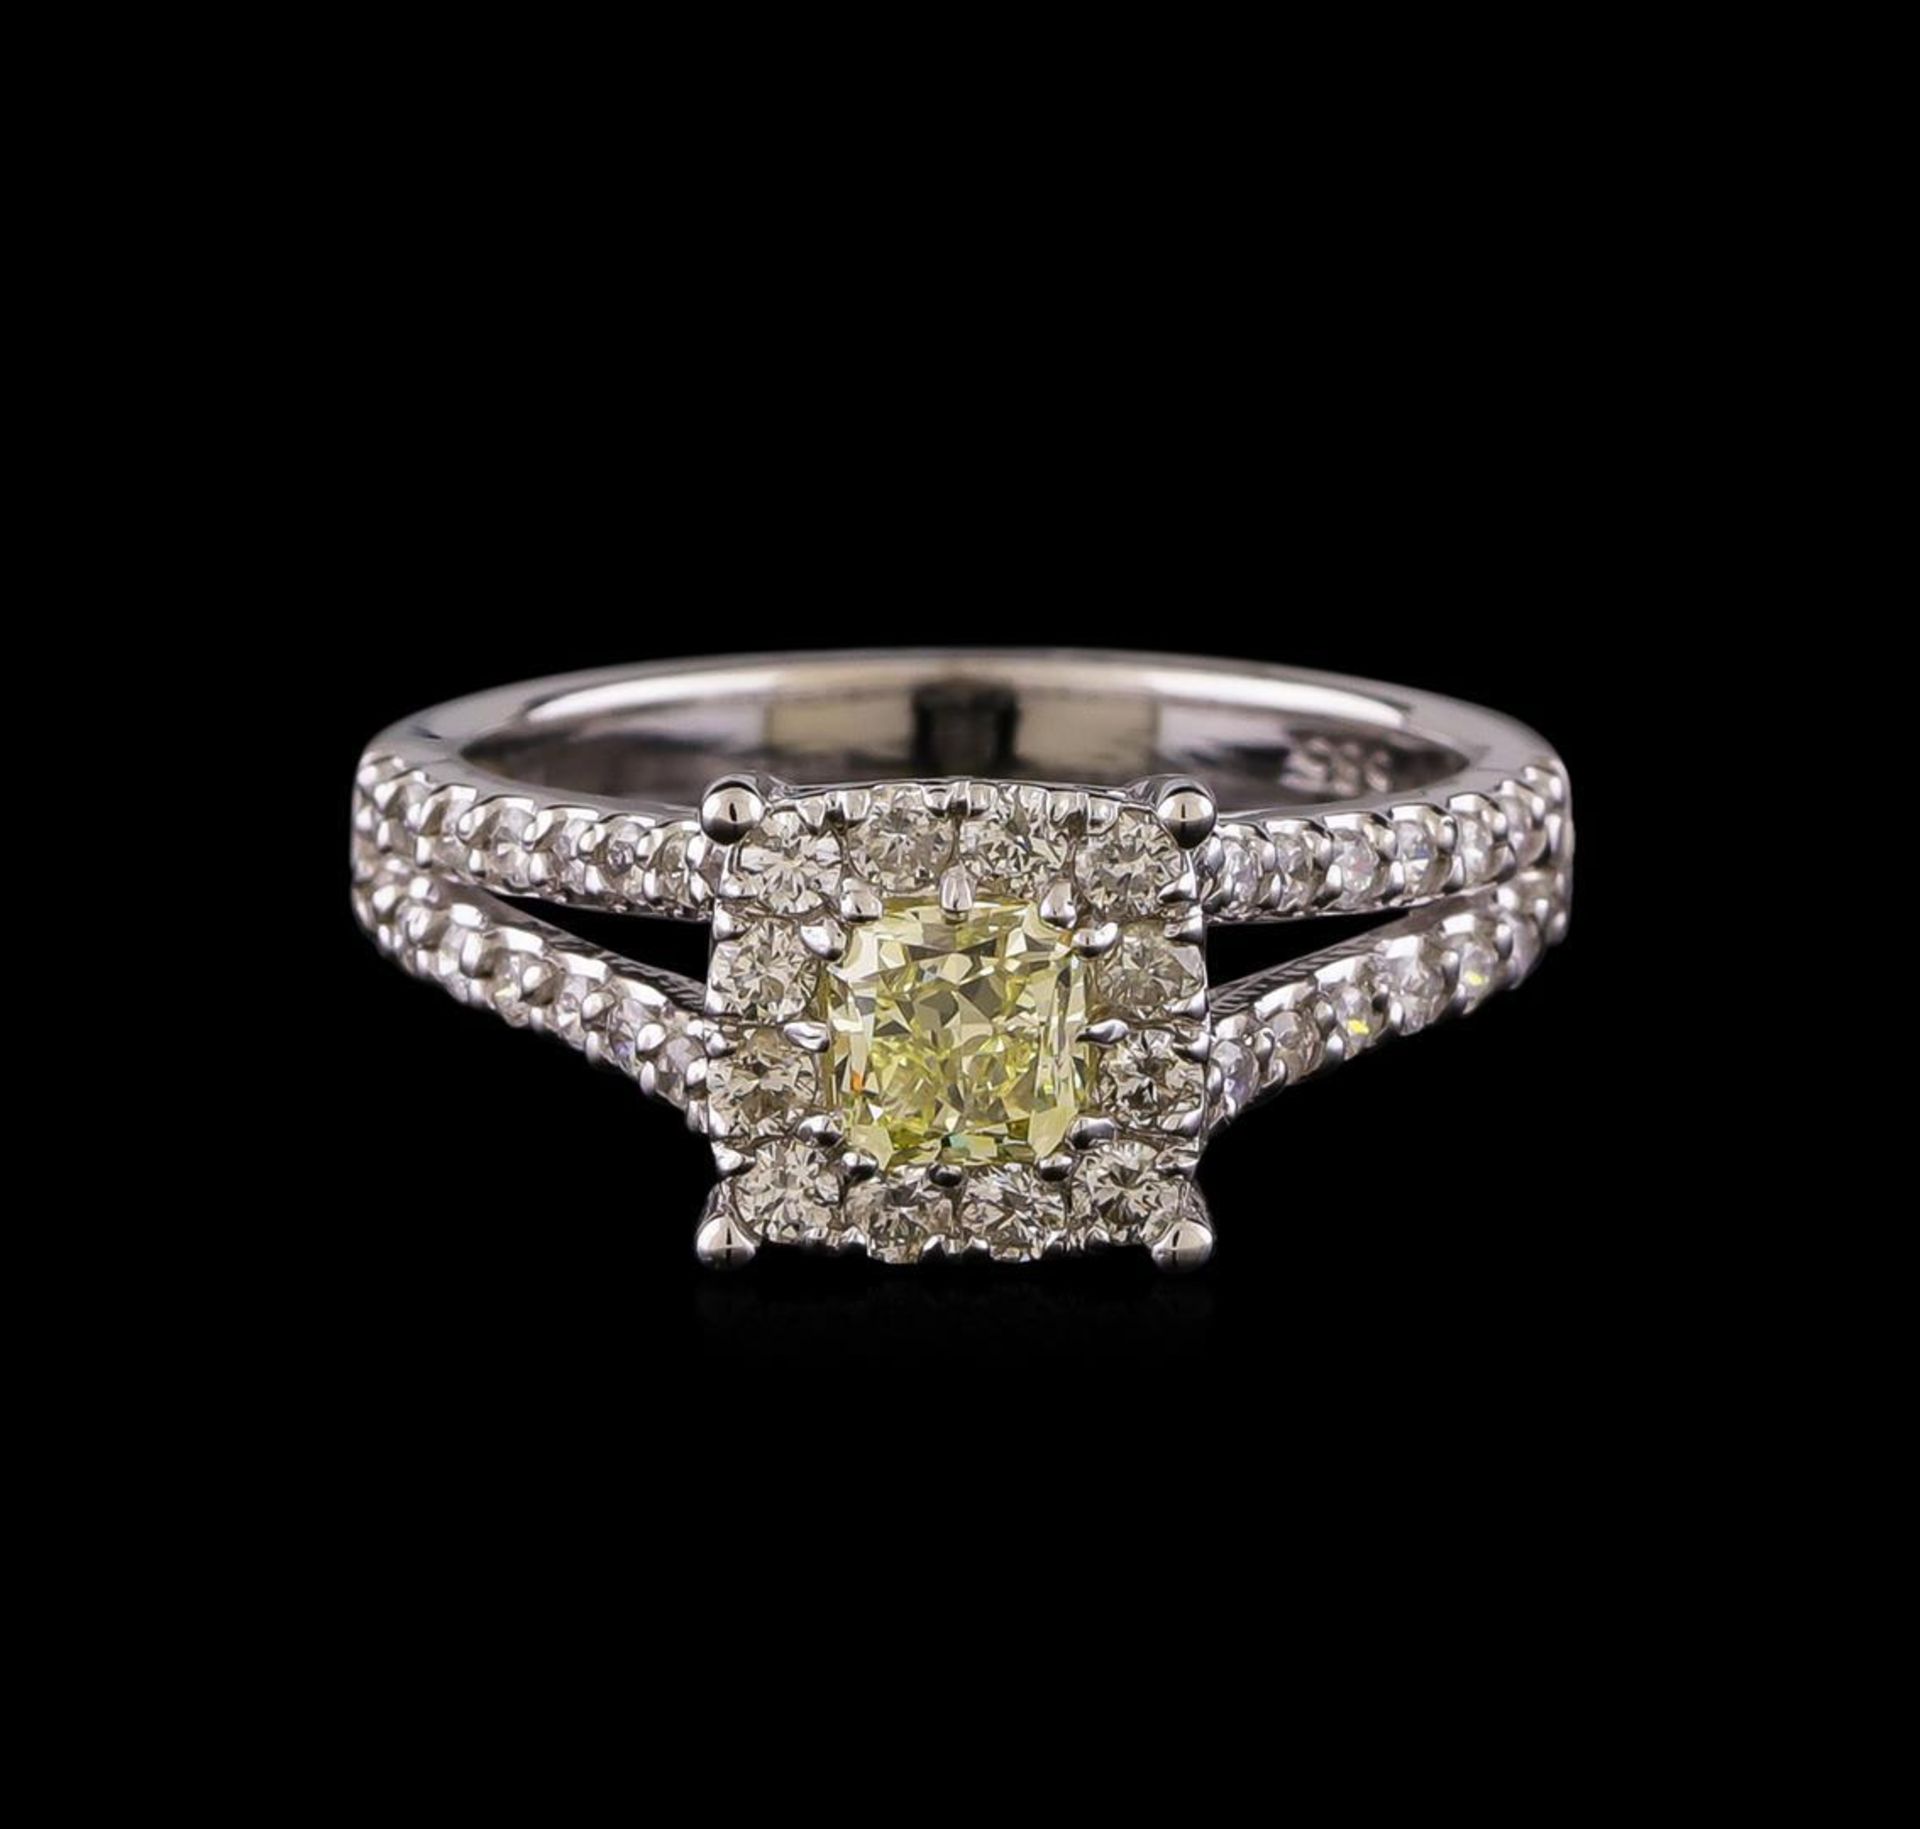 1.09 ctw Fancy Yellow Diamond Ring - 14KT White Gold - Image 2 of 5